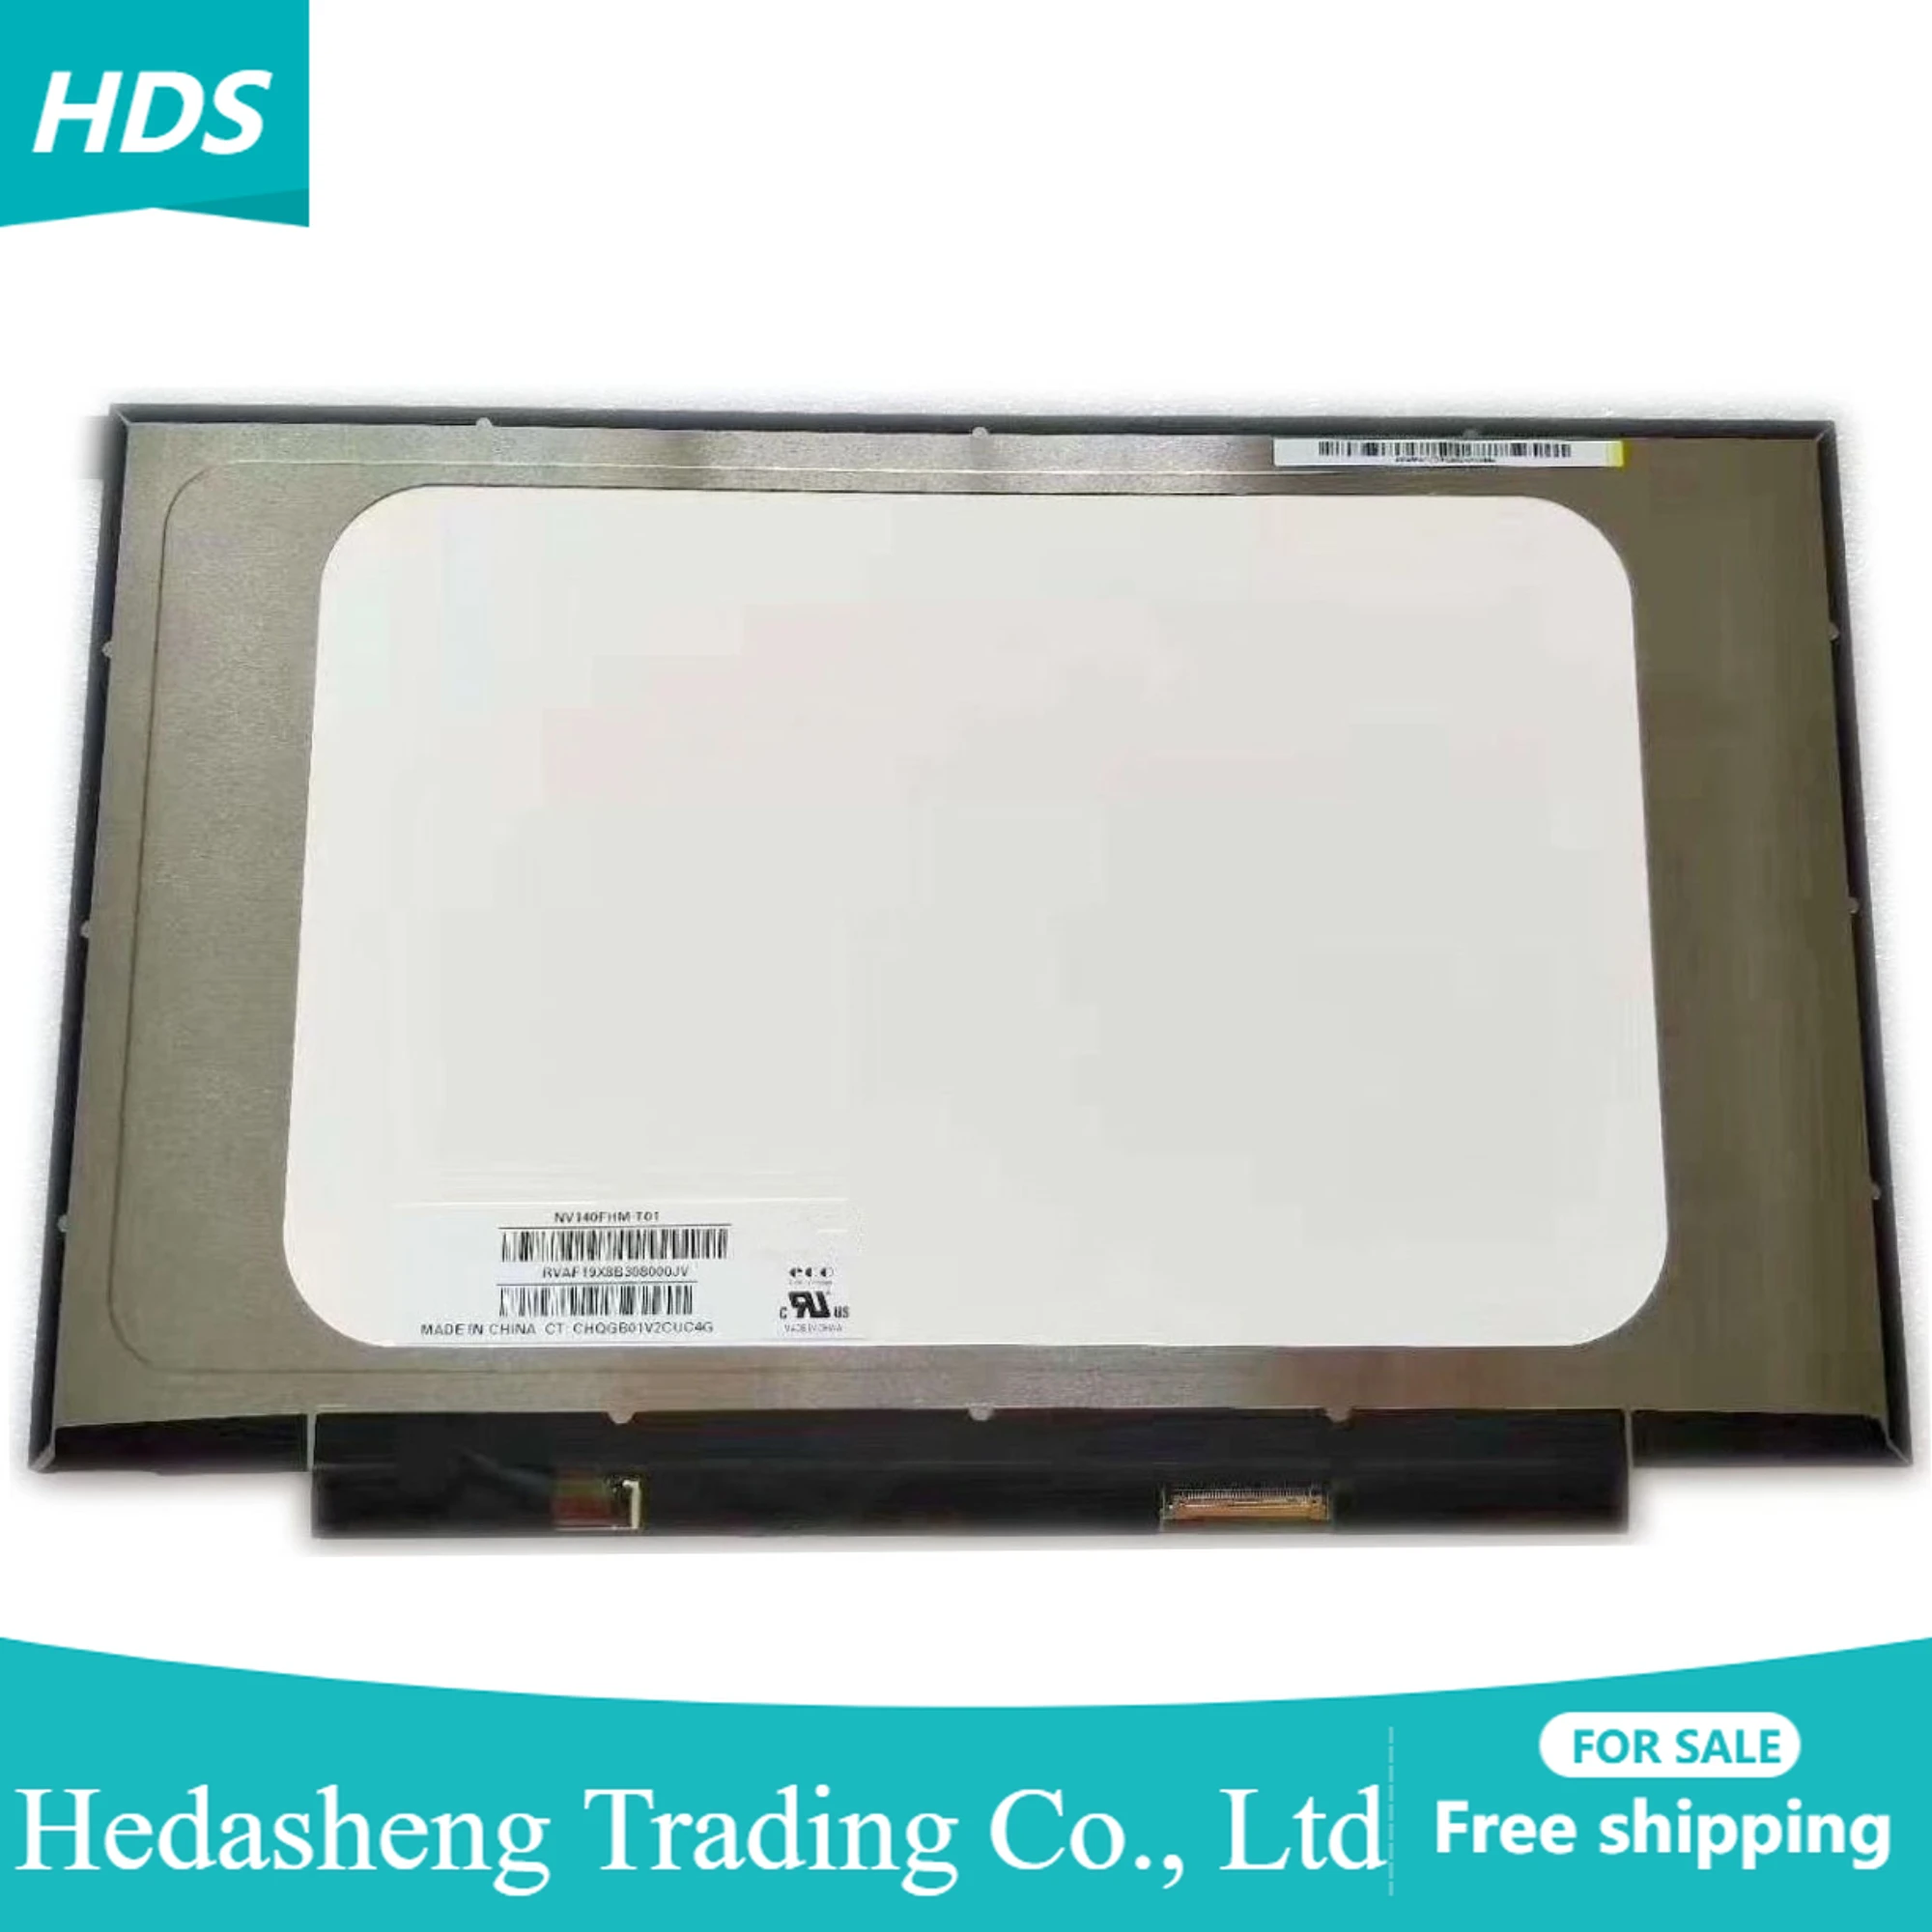 

NV140FHM-T01 14.0"Inch 1920*1080 40 PIN FHD Display Digitizer Panel Matrix LCD LED Touch Screen NEW